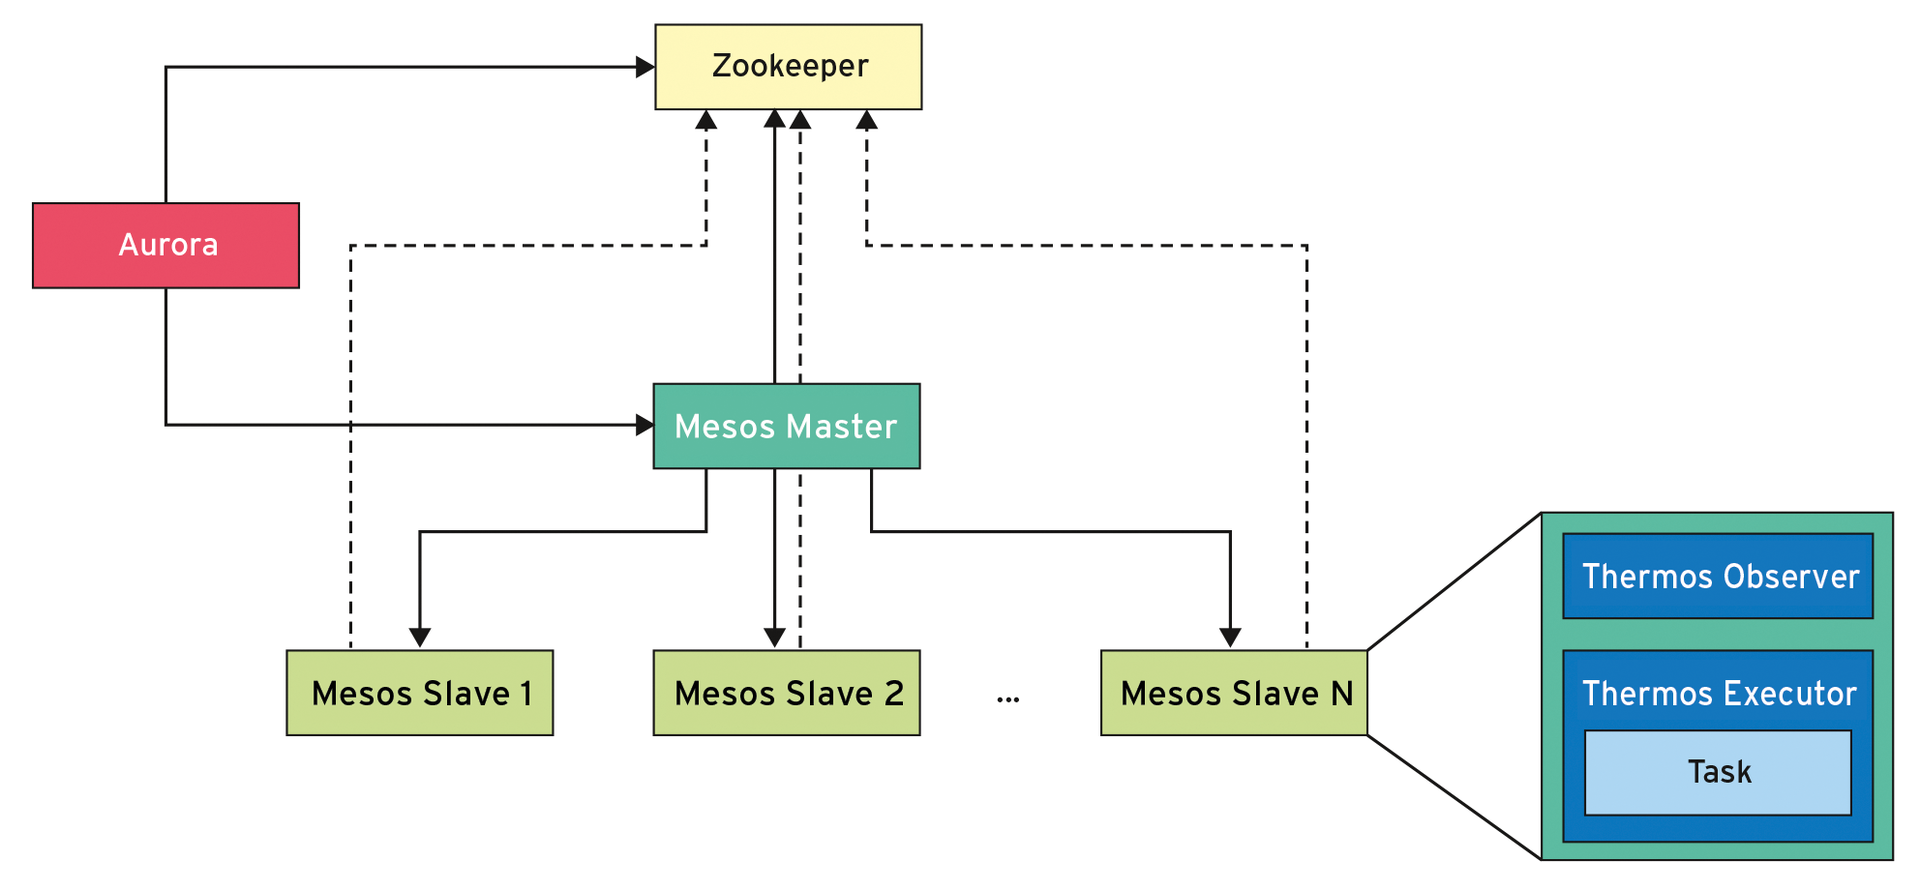 Aurora, Zookeeper, Mesos, and Thermos interacting. 